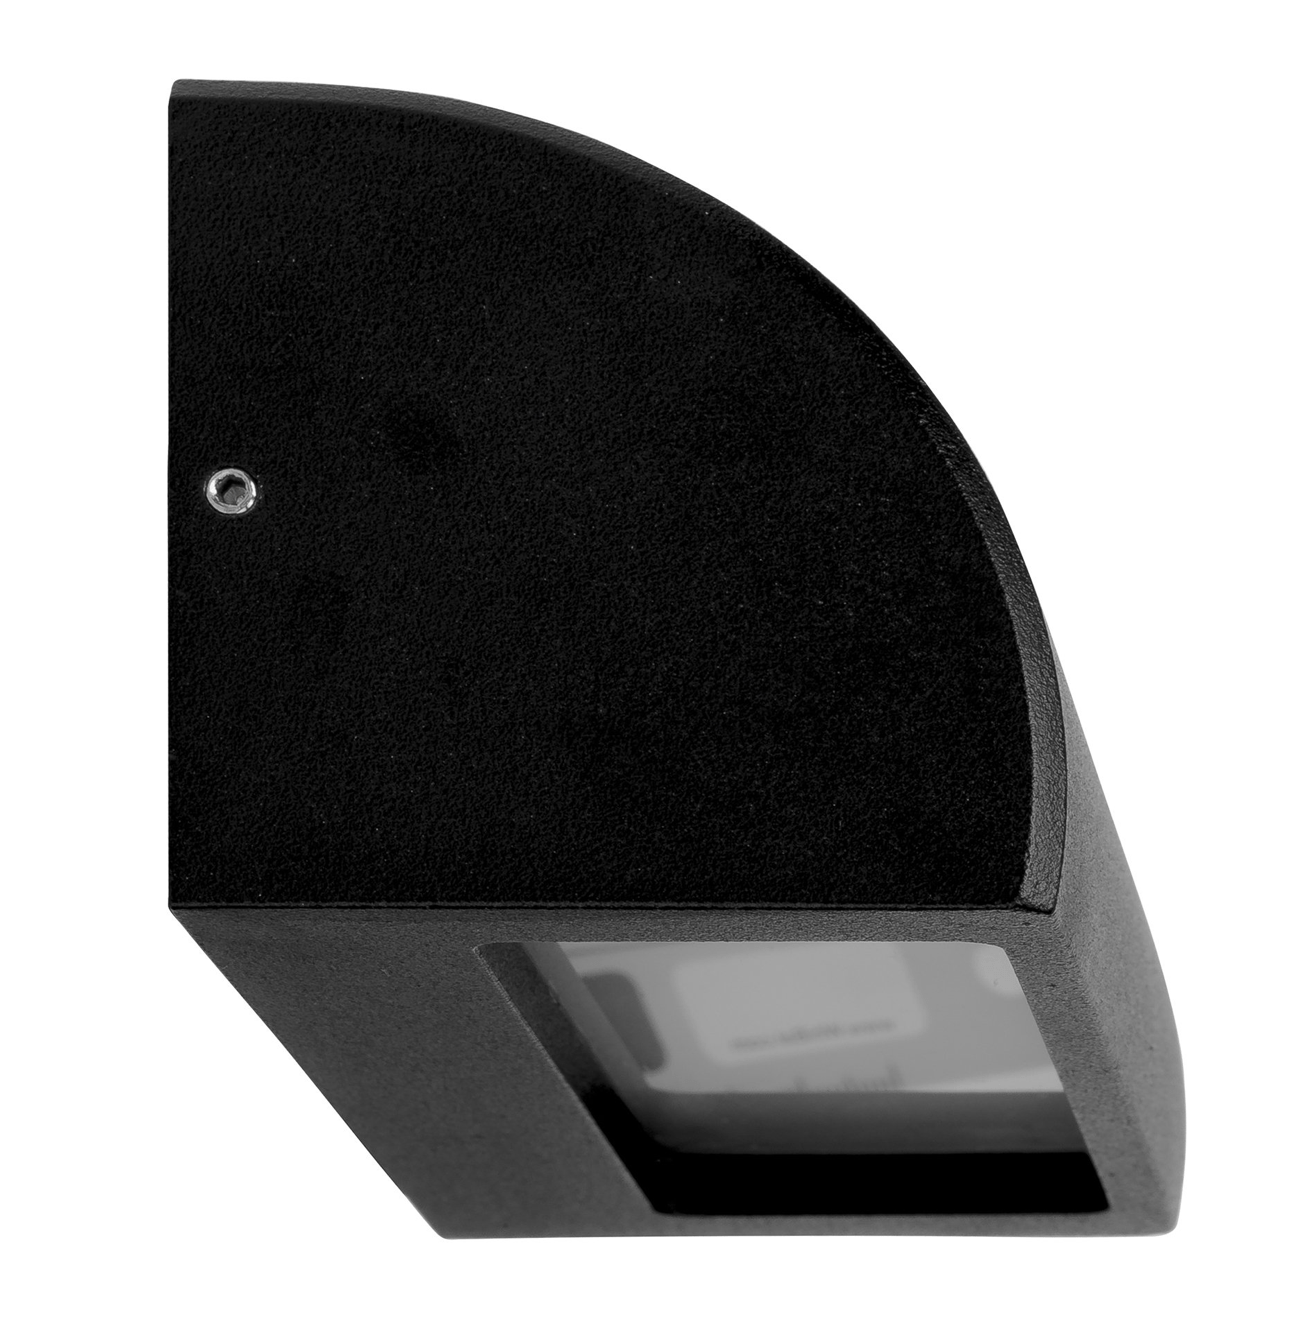 Exterior Wall Light RIDGE - Surface Mounted LED Step Lights Lighting Stores